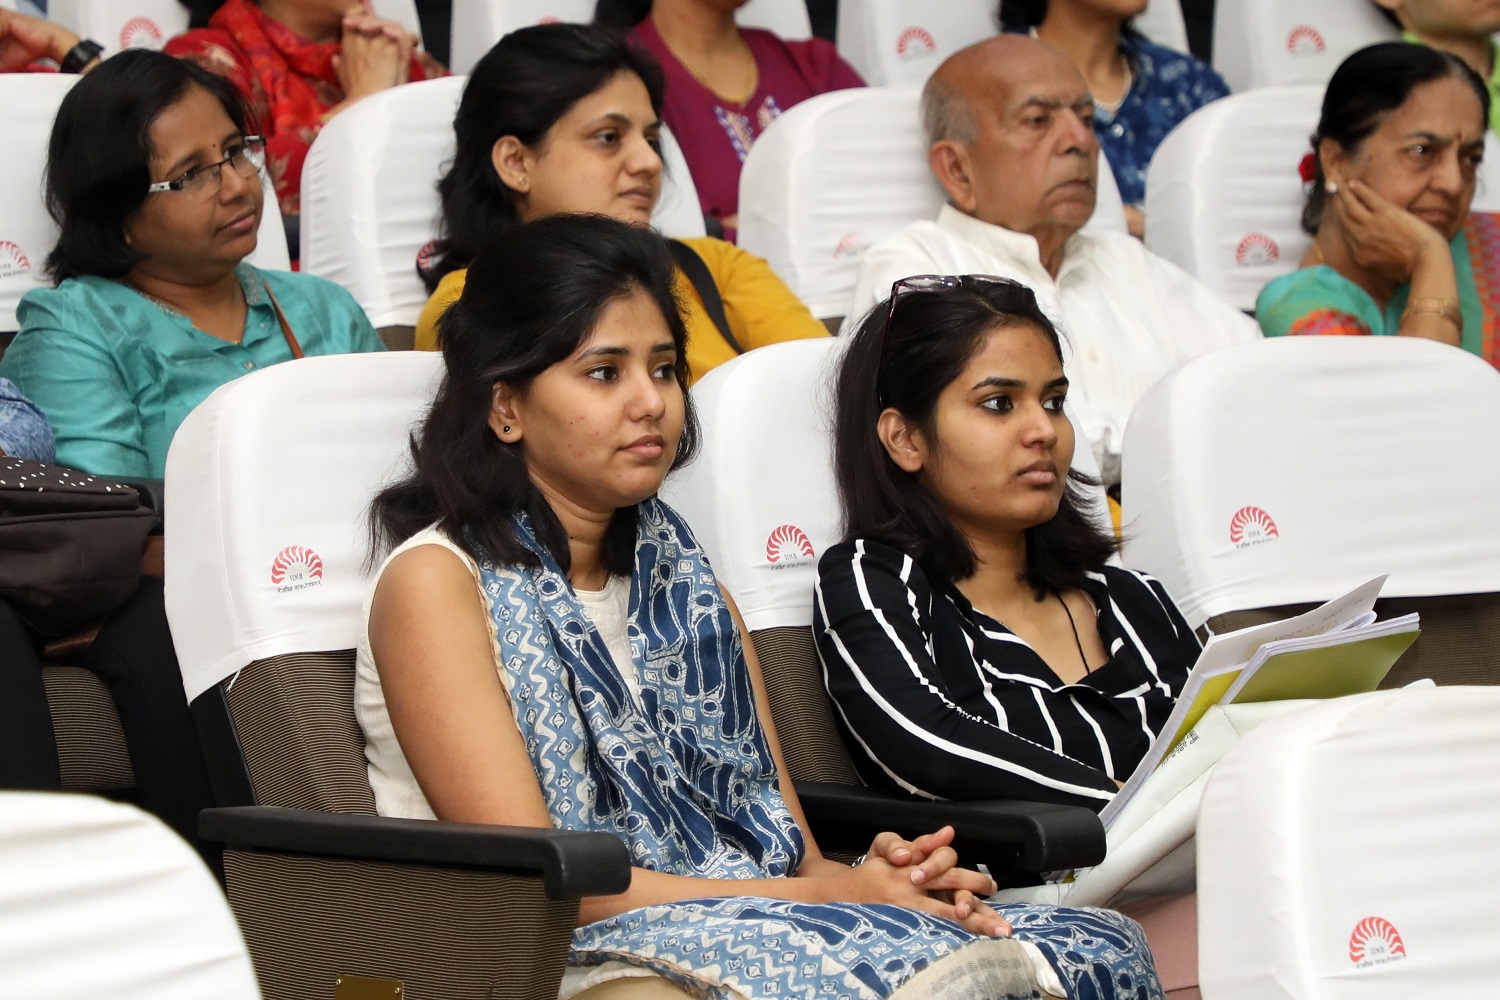 A section of the audience, during the event, at IIM Bangalore.